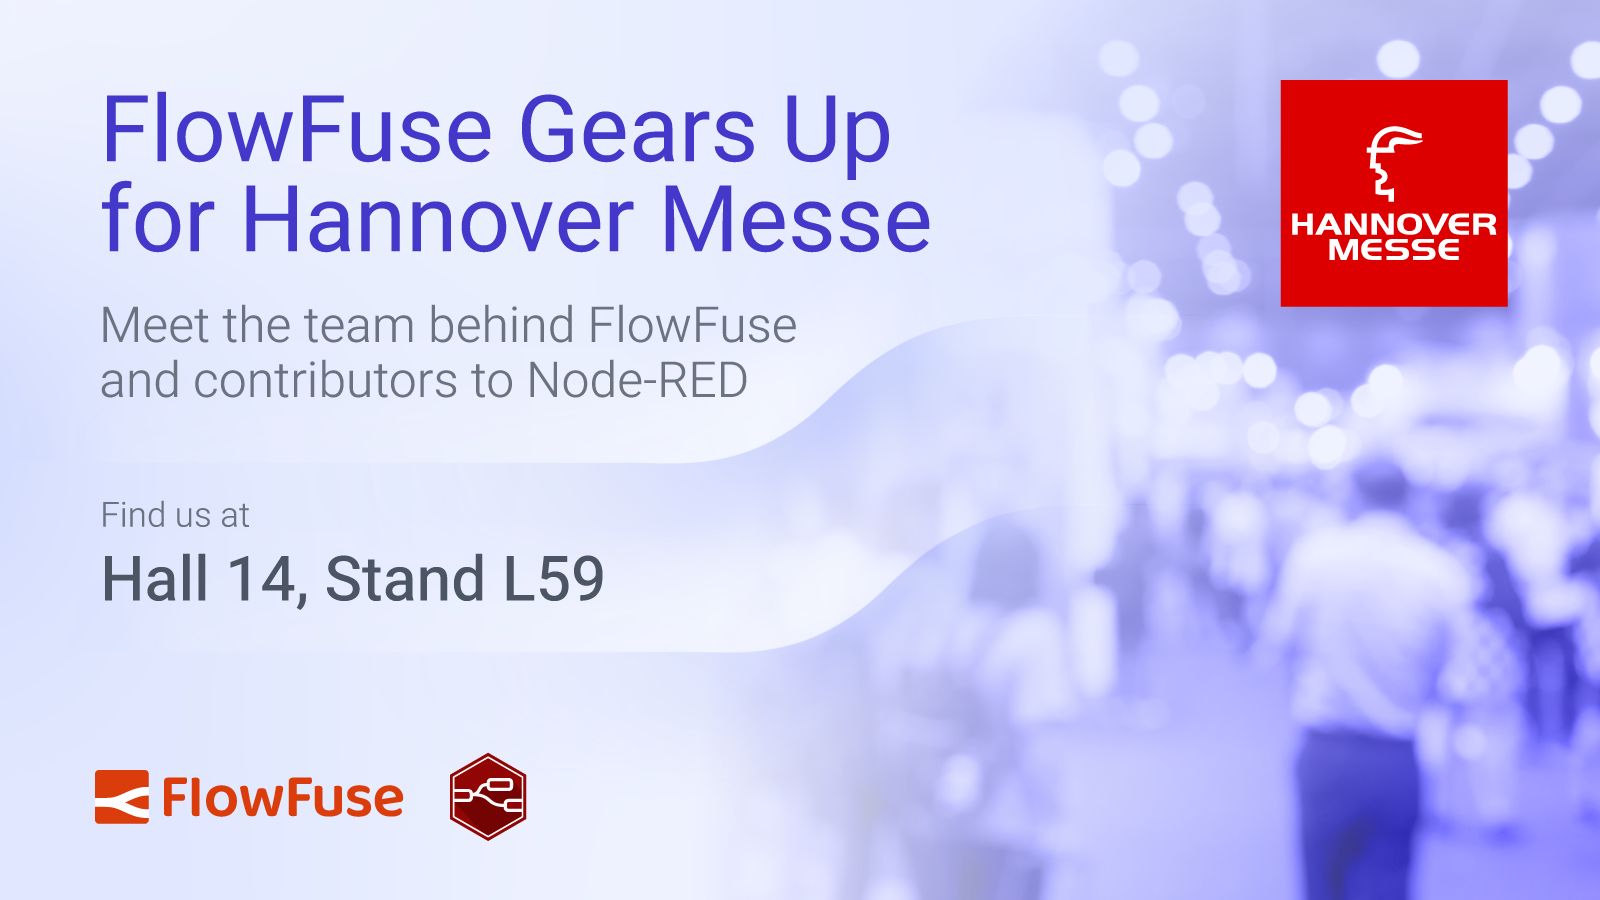 Image representing FlowFuse Gears Up for Hannover Messe